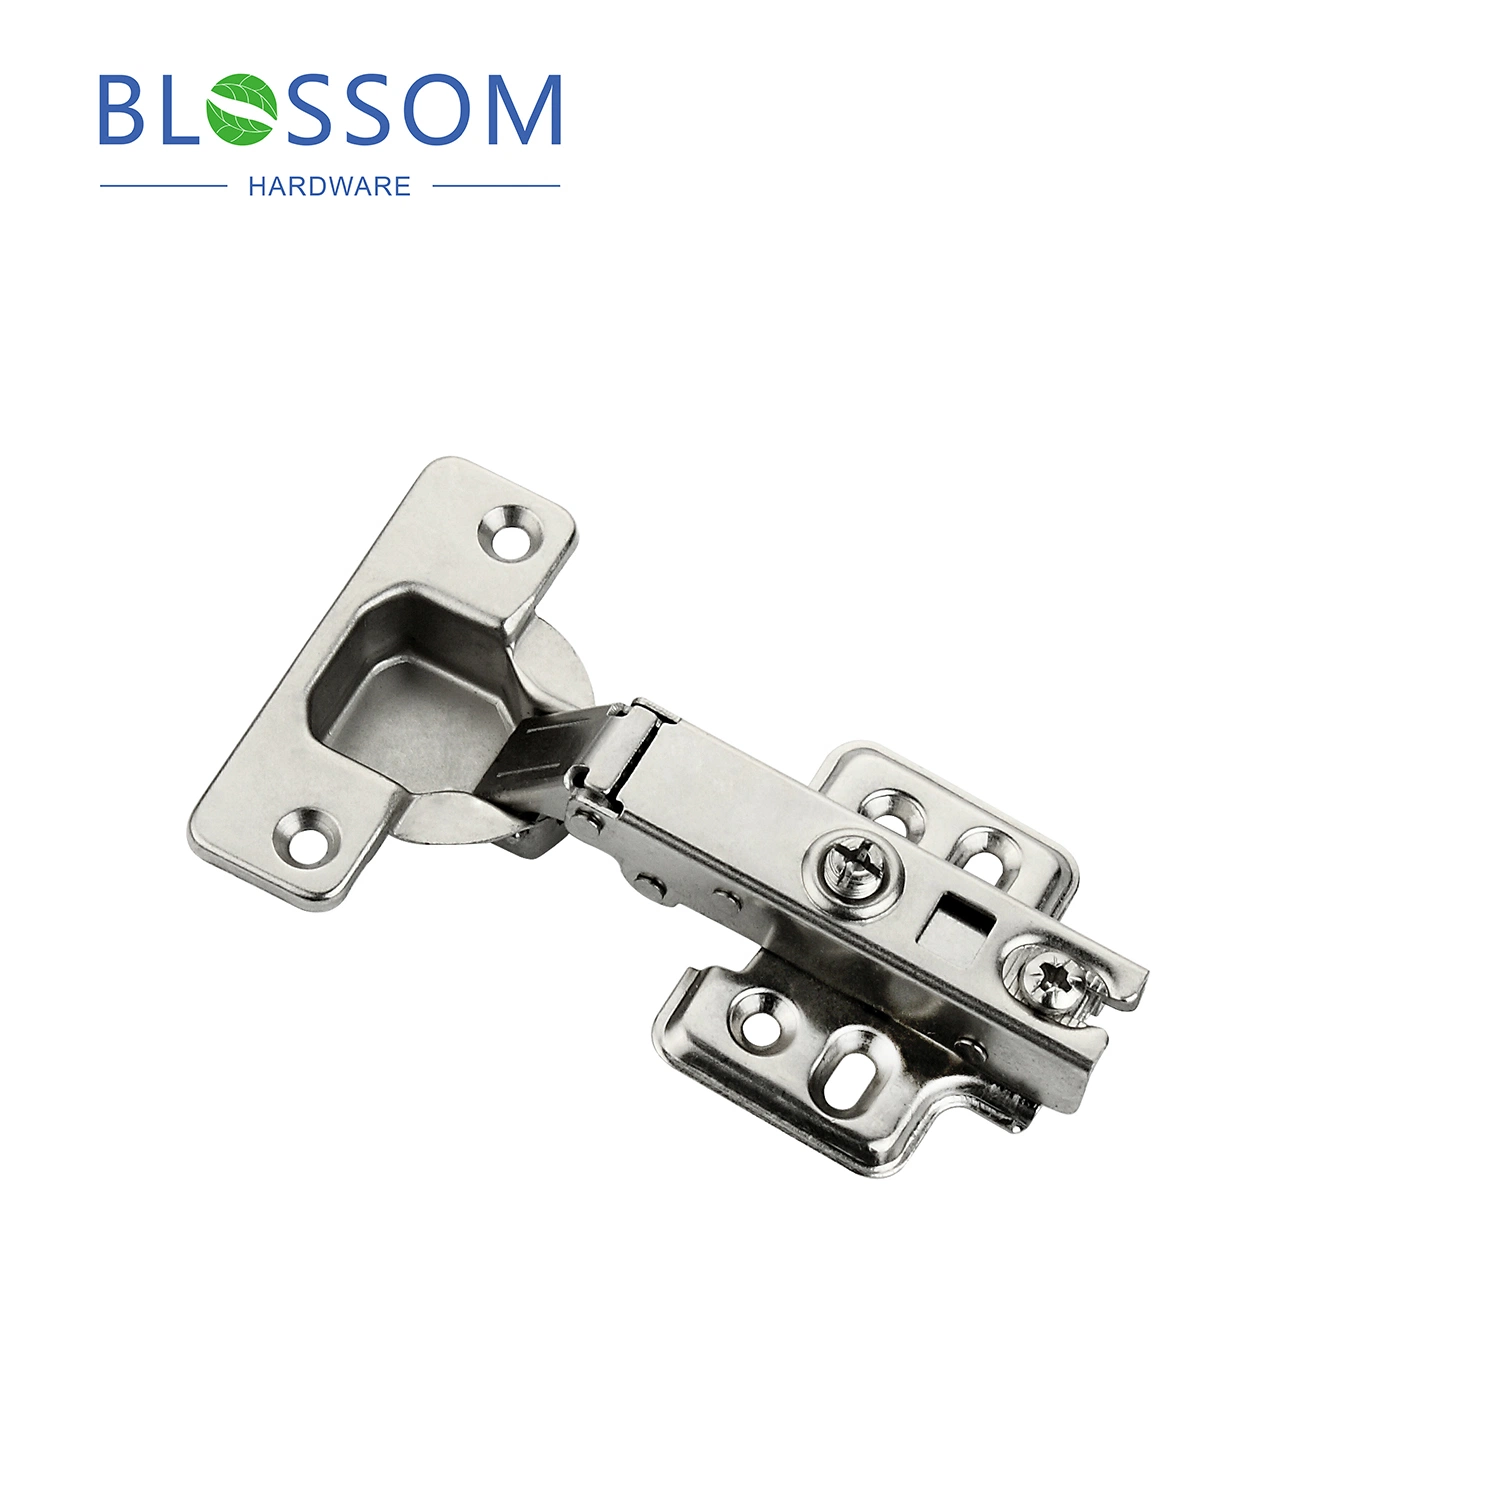 Soft Closing Hydraulic Cabinet Concealed Door Hinge Furniture Hardware Hinges